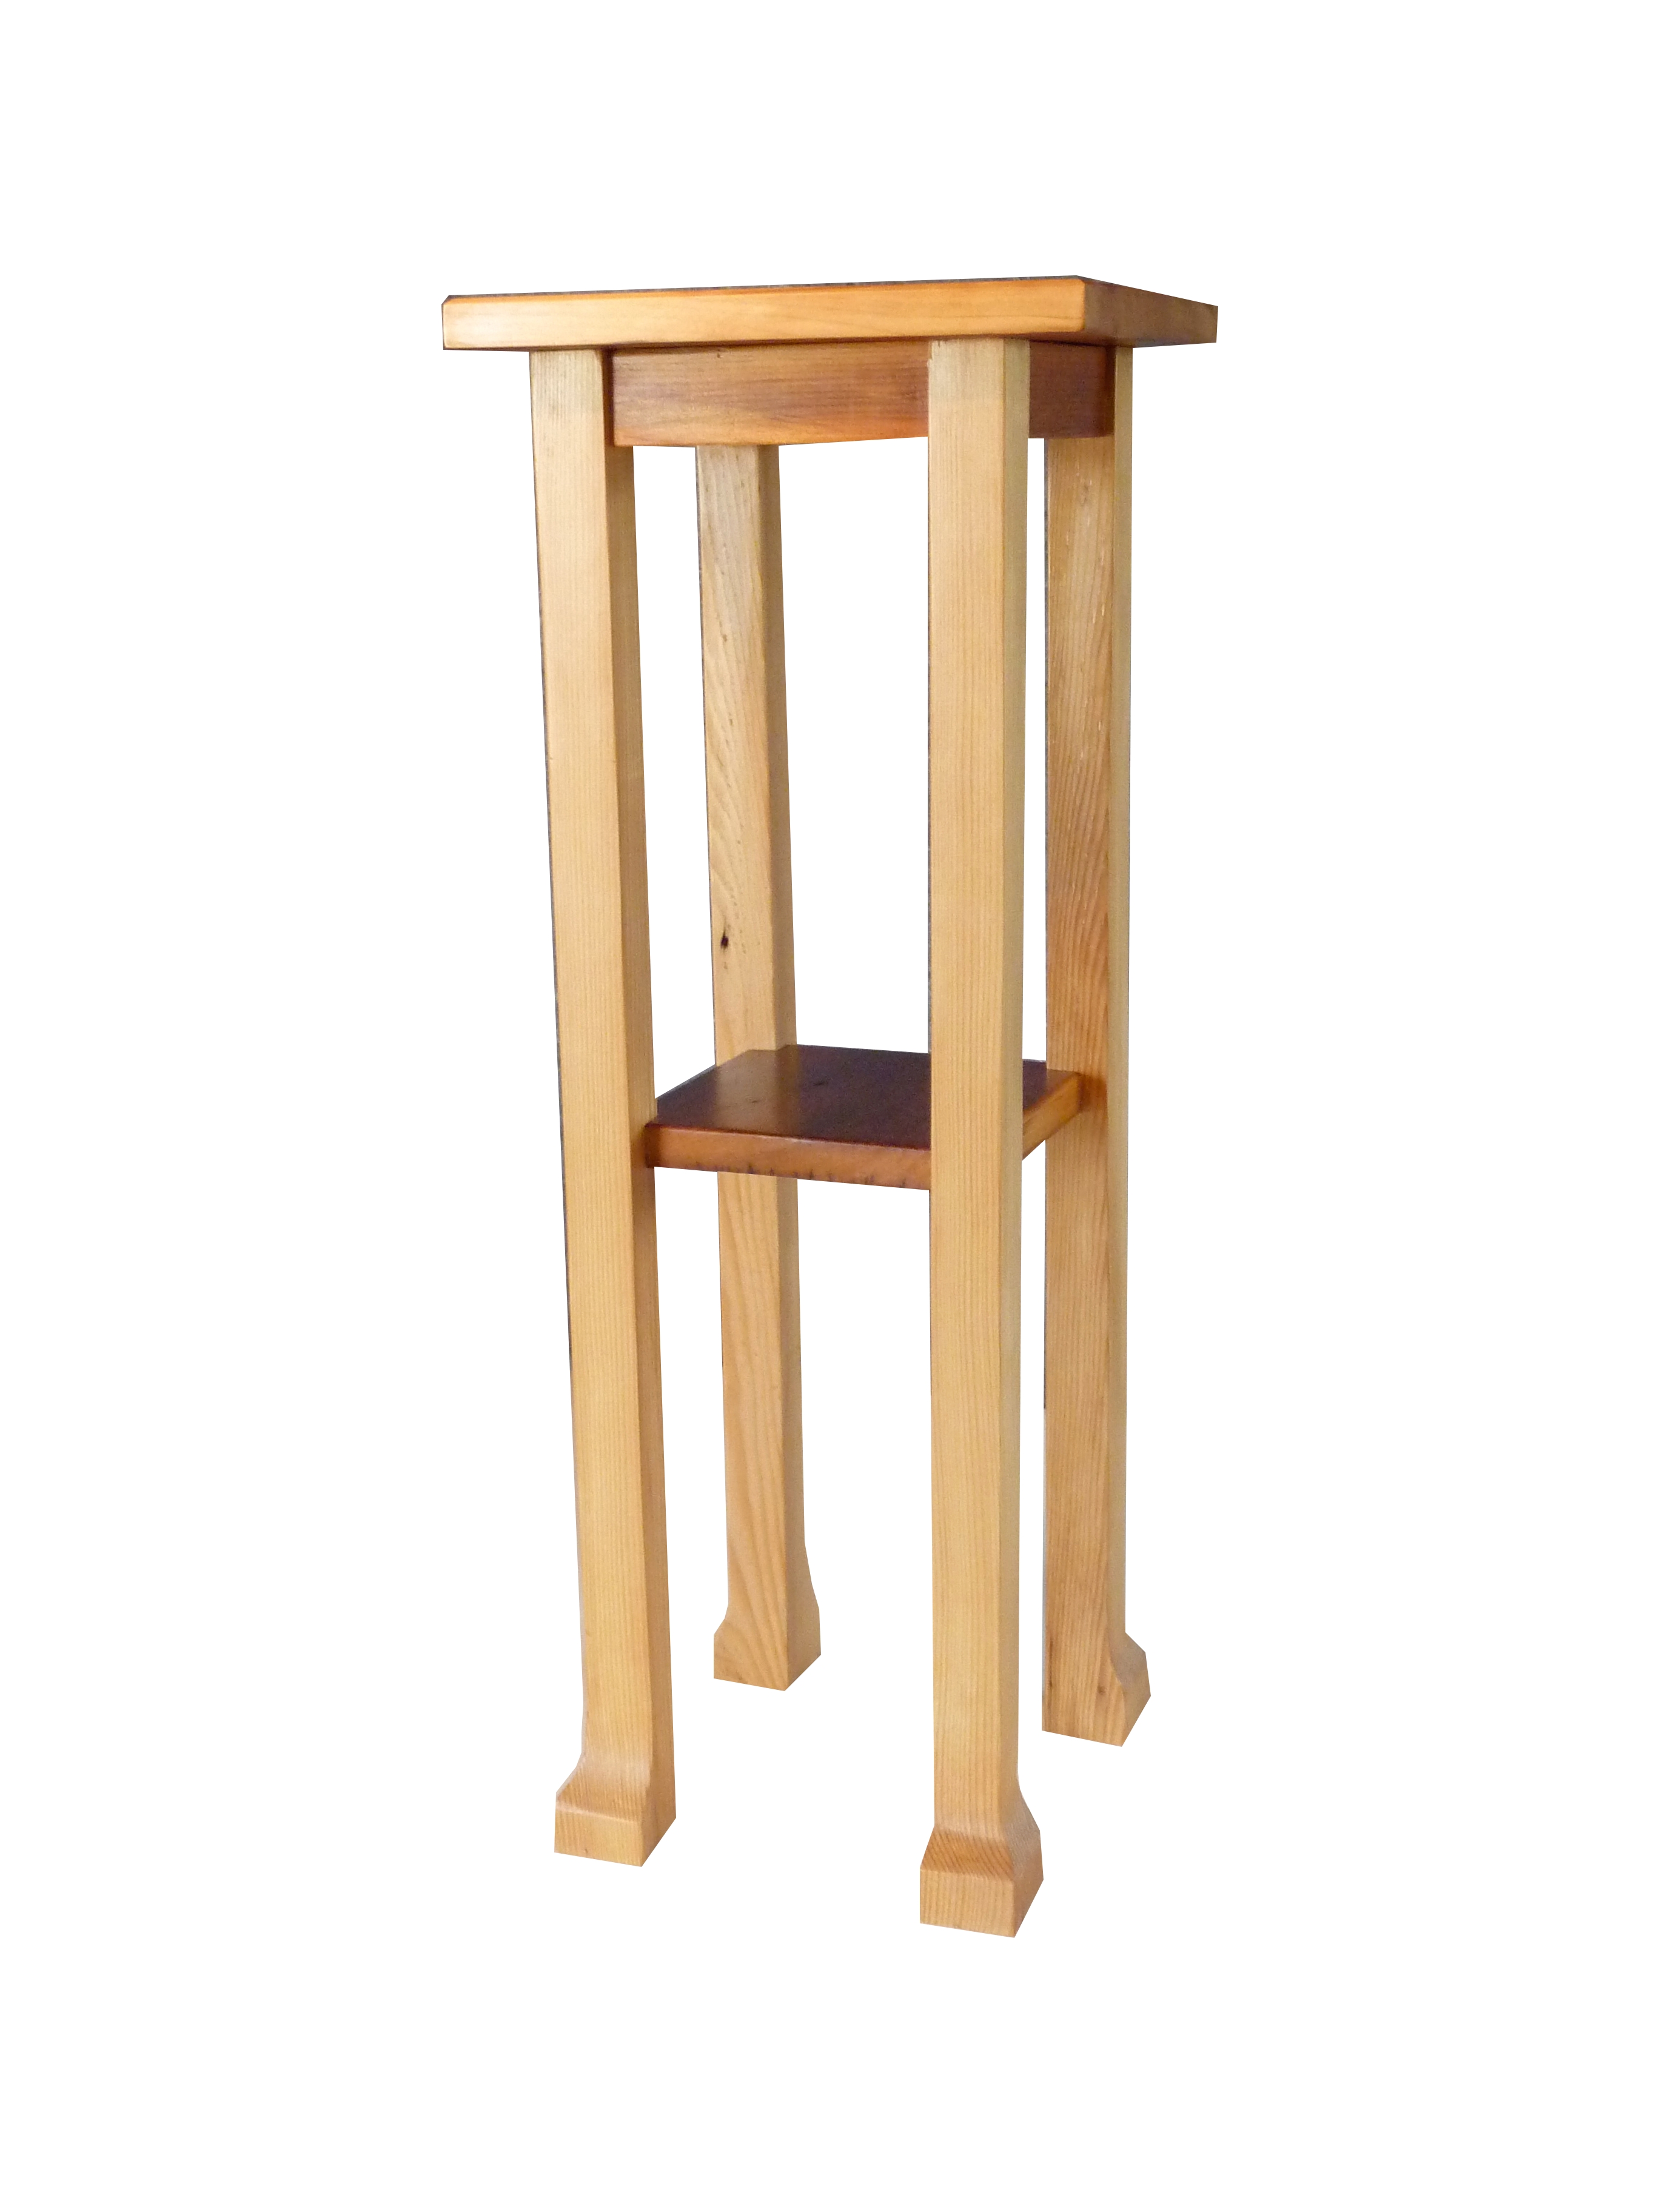 Pronghorn fawn plant stand